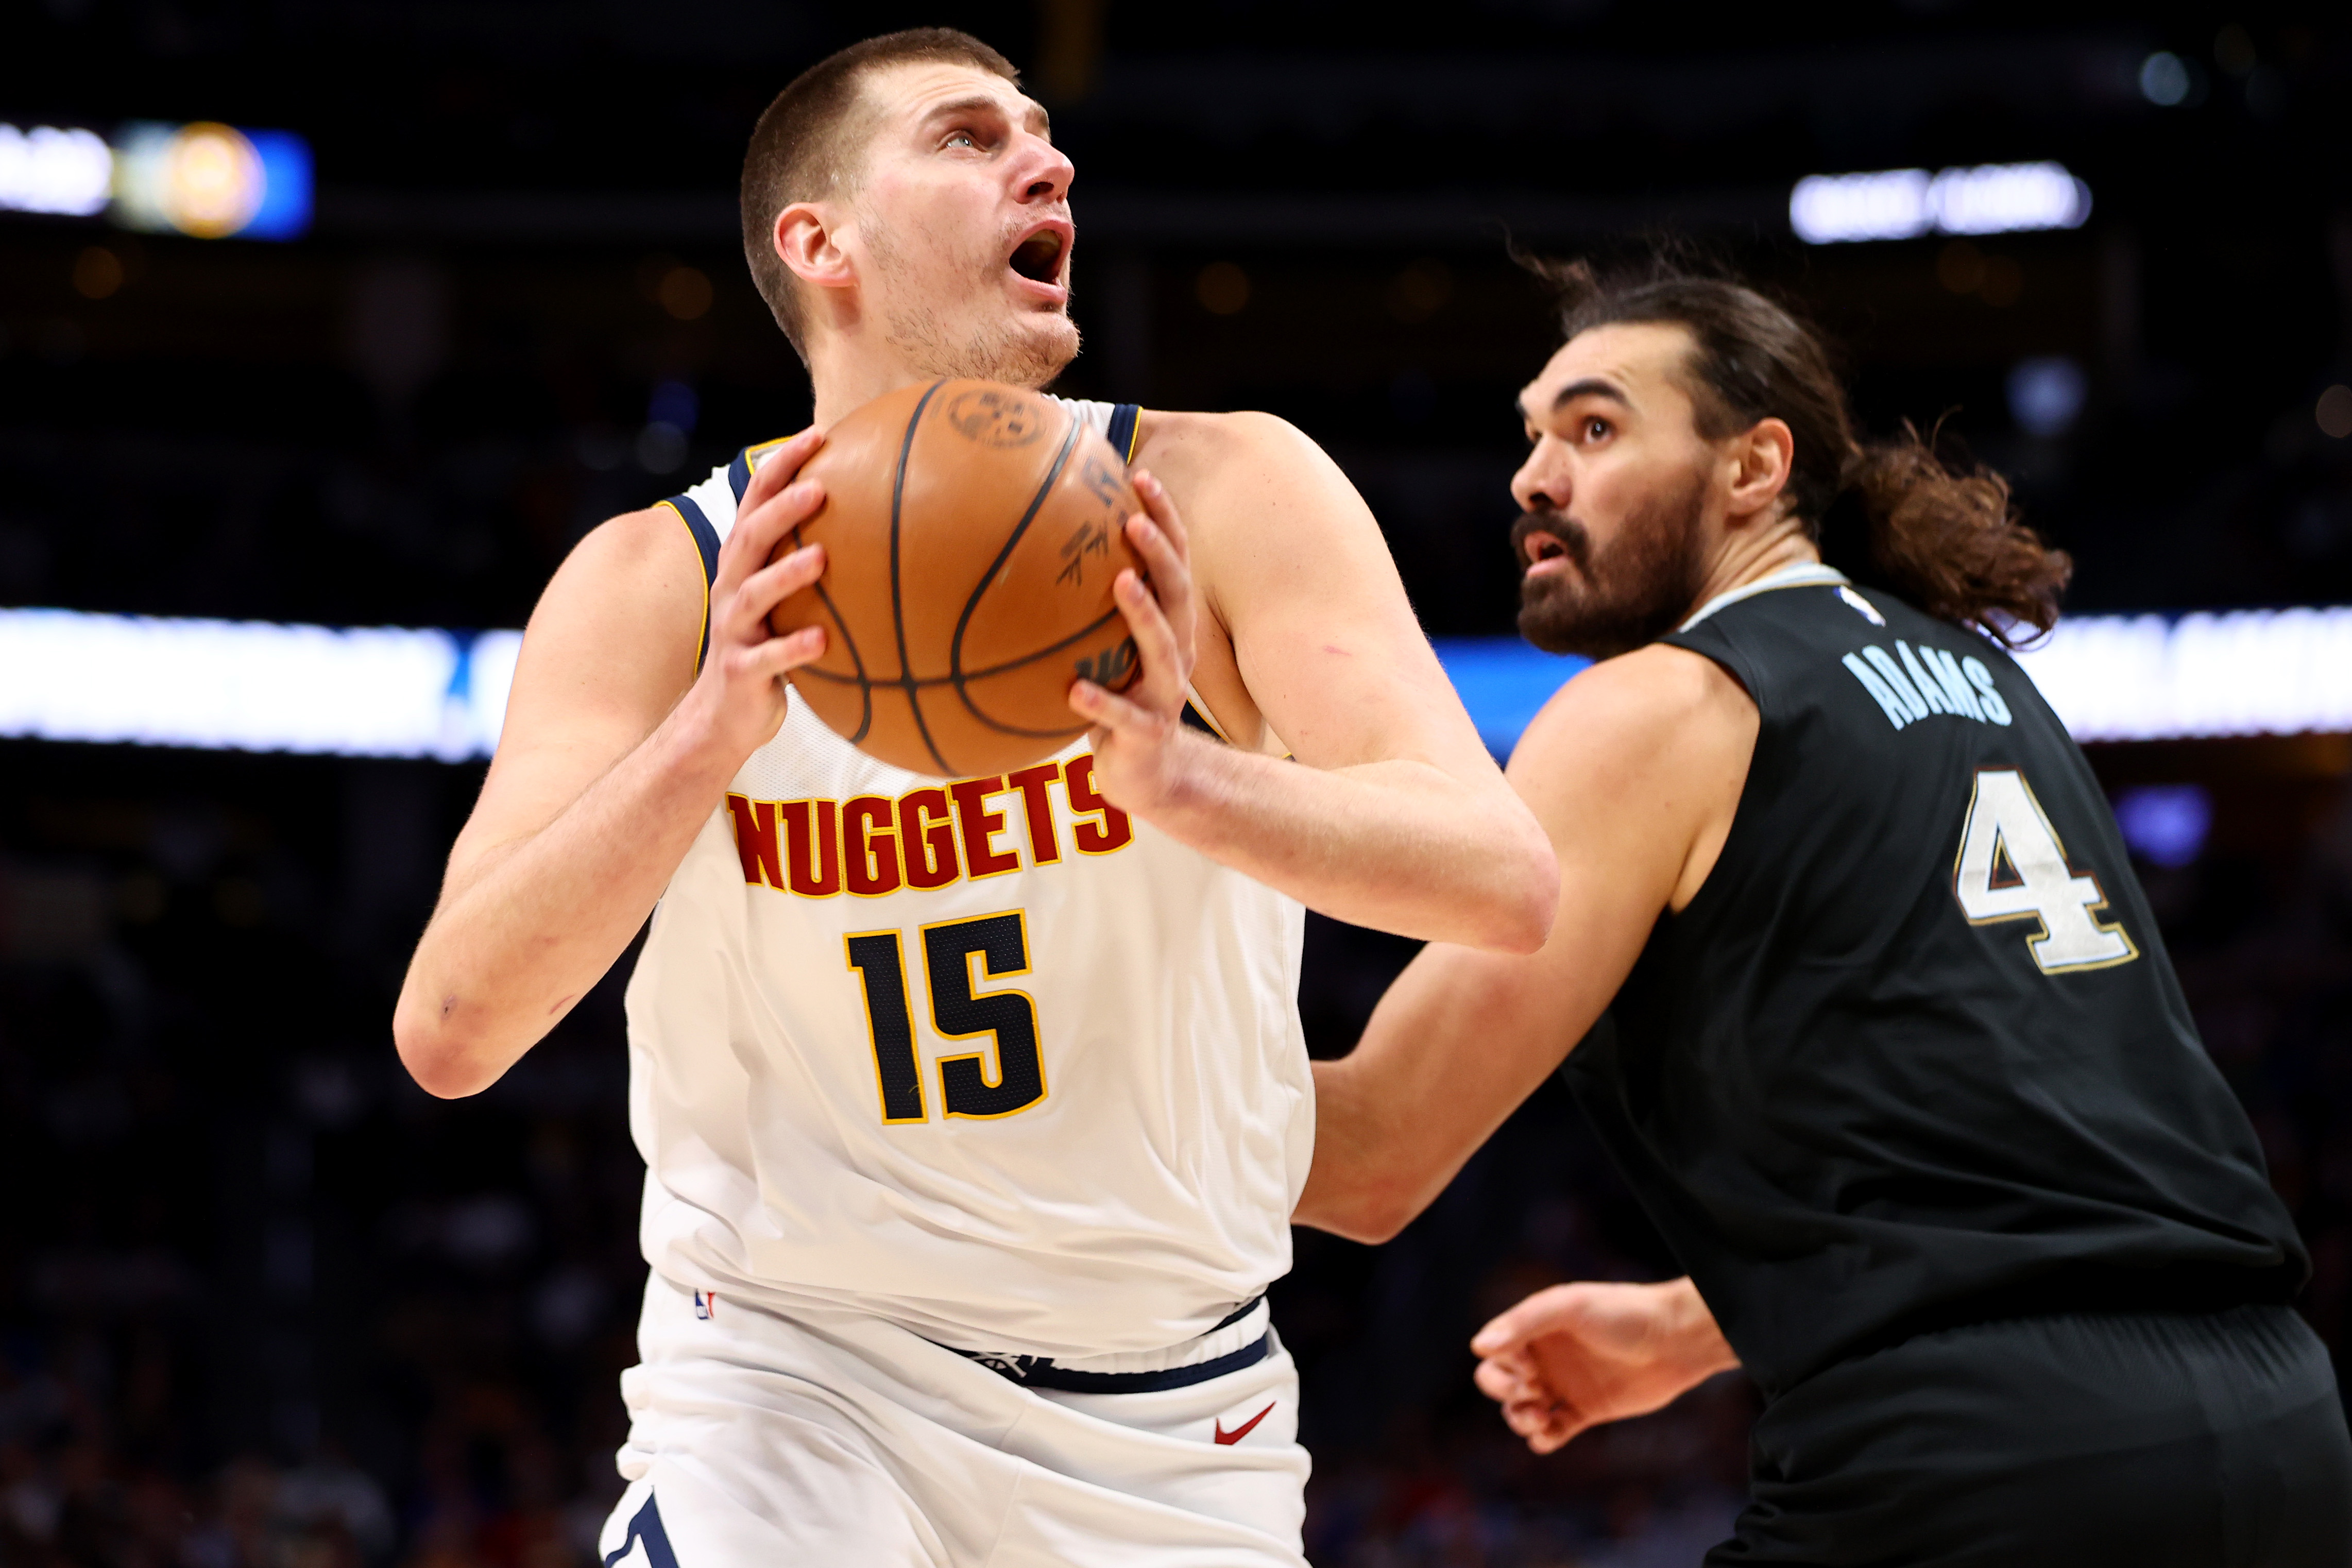 Suns vs. Nuggets Christmas schedule: Start time, live stream, TV